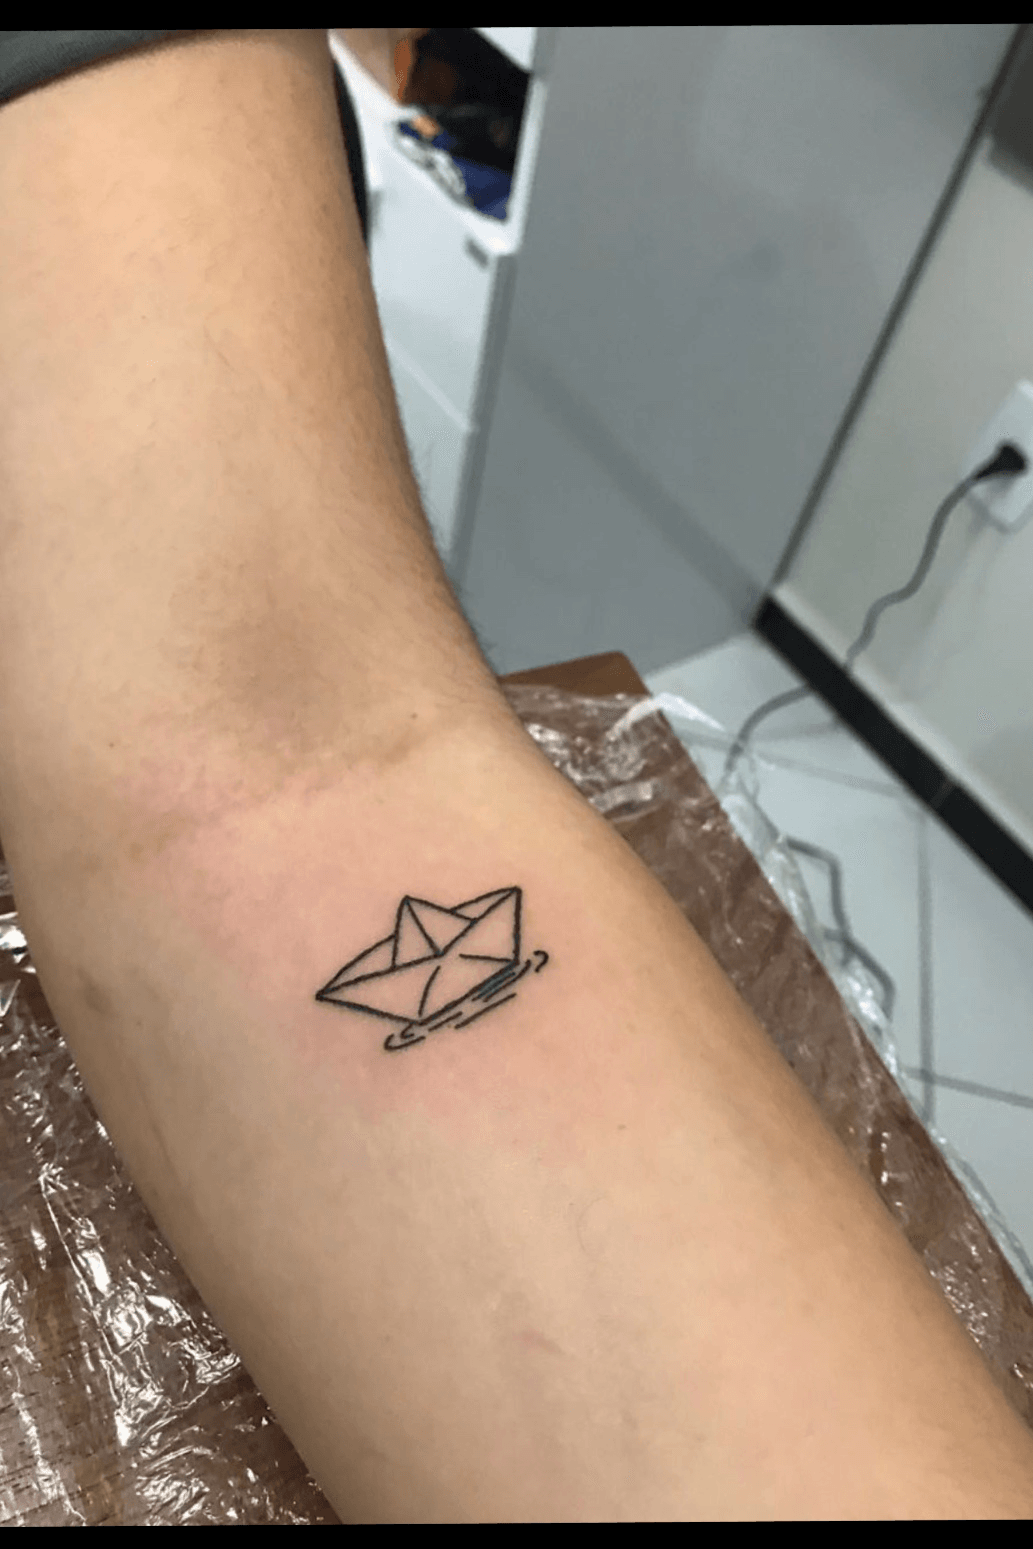 100 Epic Ship Tattoos and Meaning (Newest Gallery) - The Trend Scout